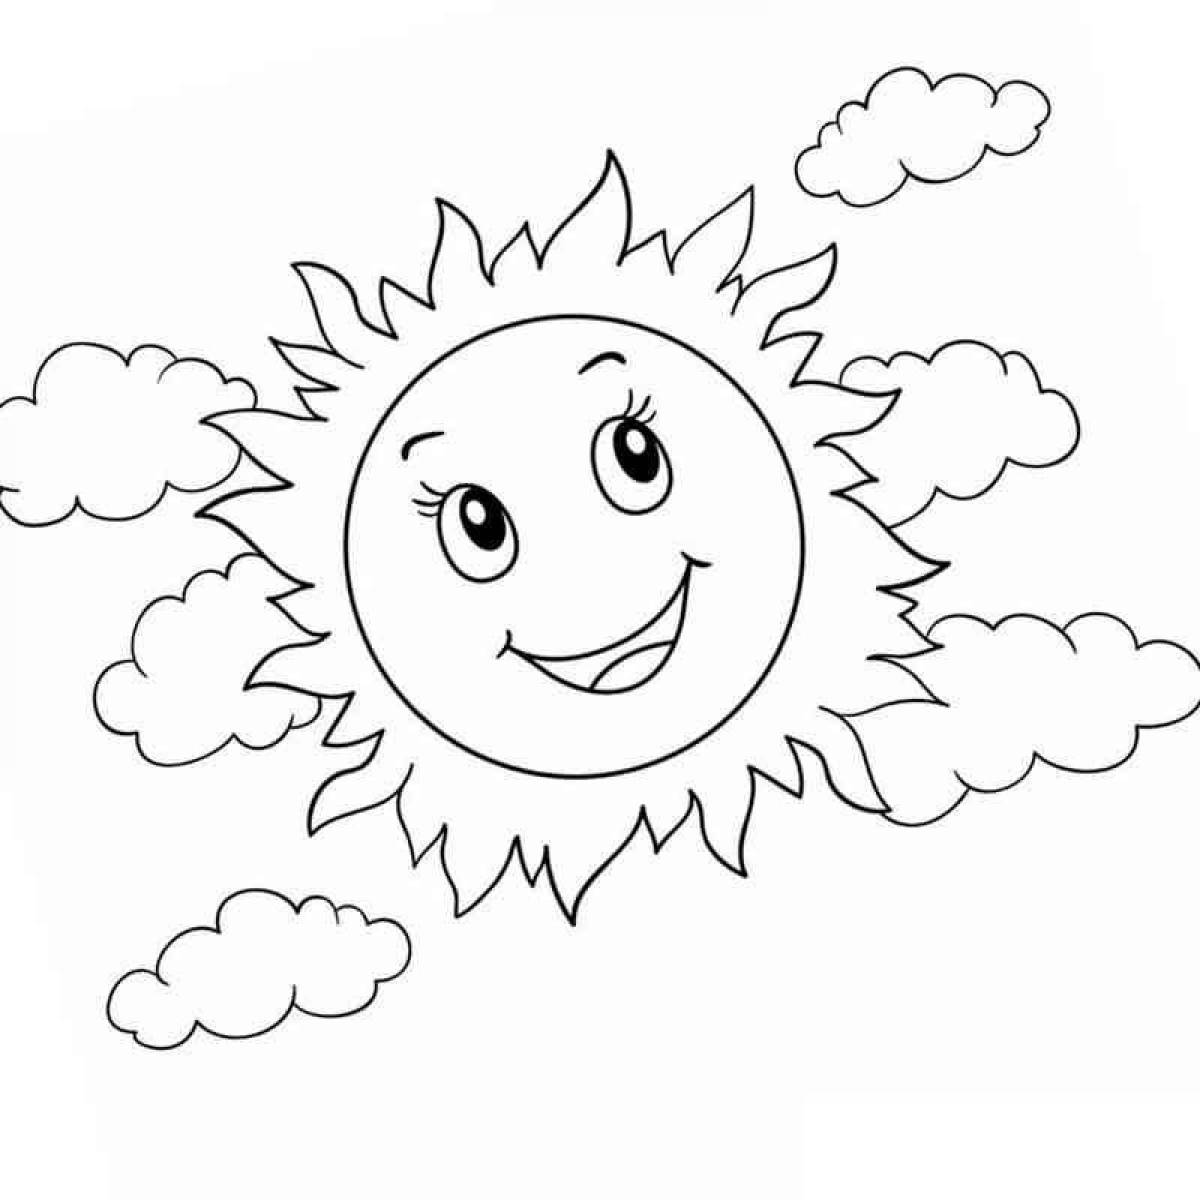 Sun dazzling coloring book for 3-4 year olds